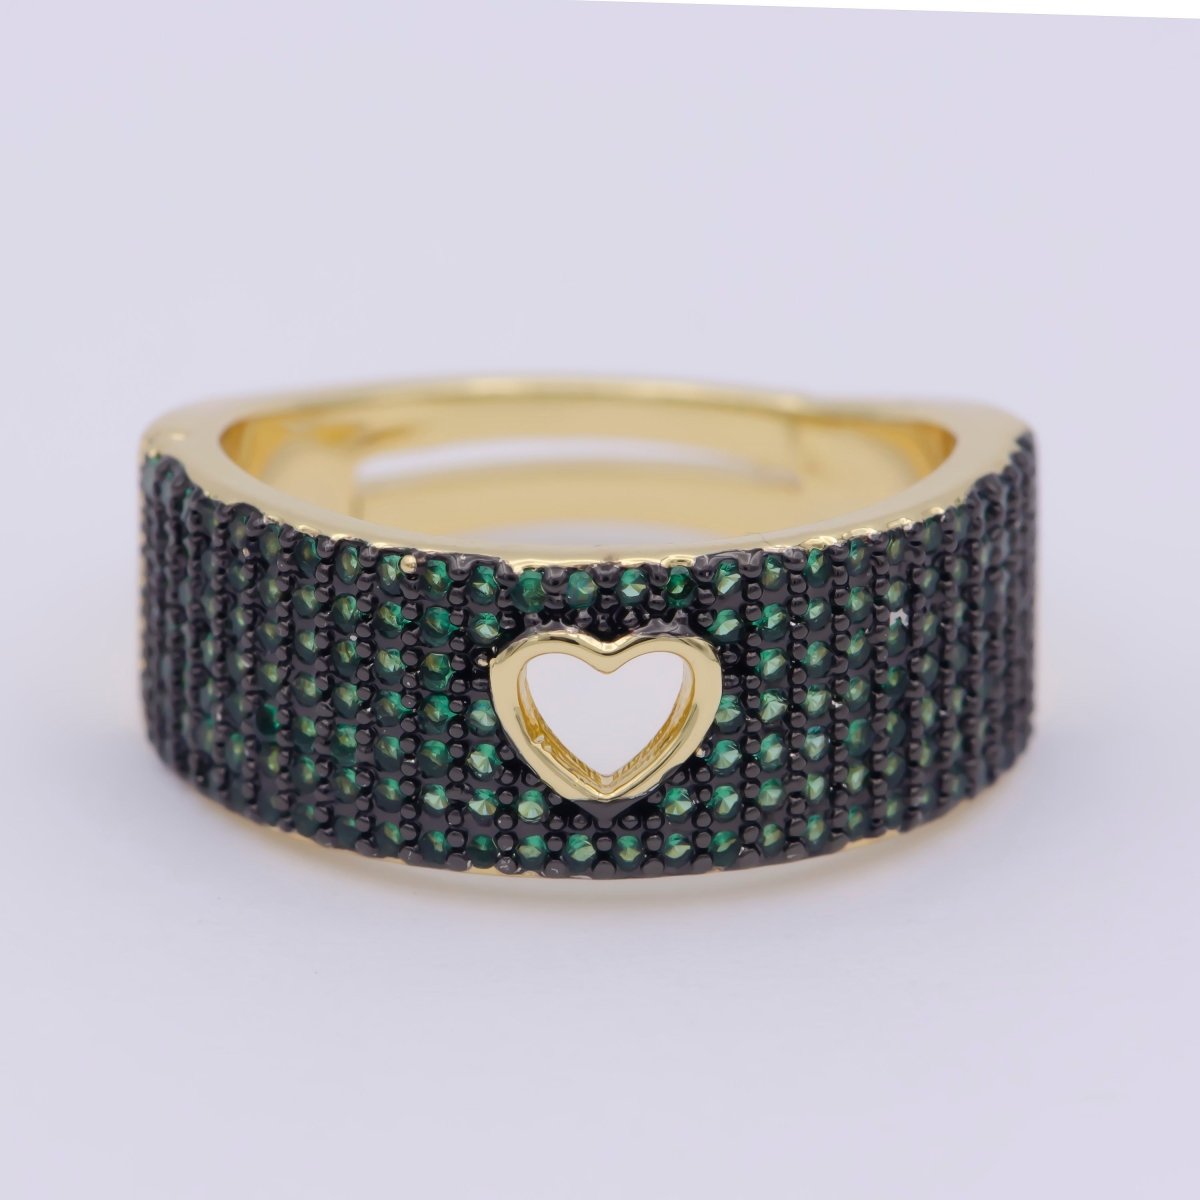 Dainty Heart Adjustable Ring, Gold Cz Dark Ring, Blue Green Purple Teal Stone Heart Jewelry Trend | O-460 ~ O-464 - DLUXCA